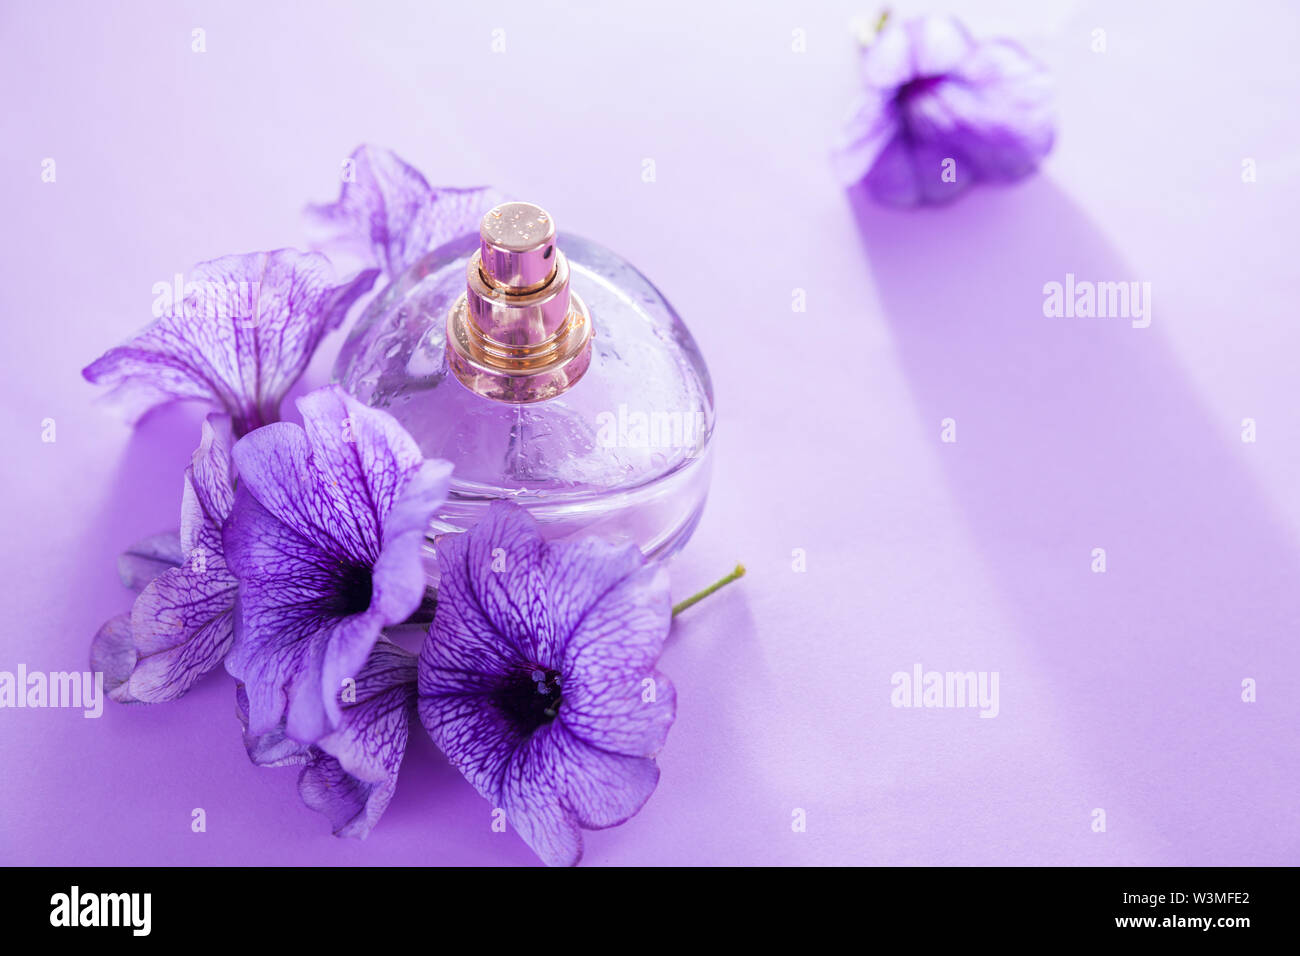 Bottle of perfume with flowers on 